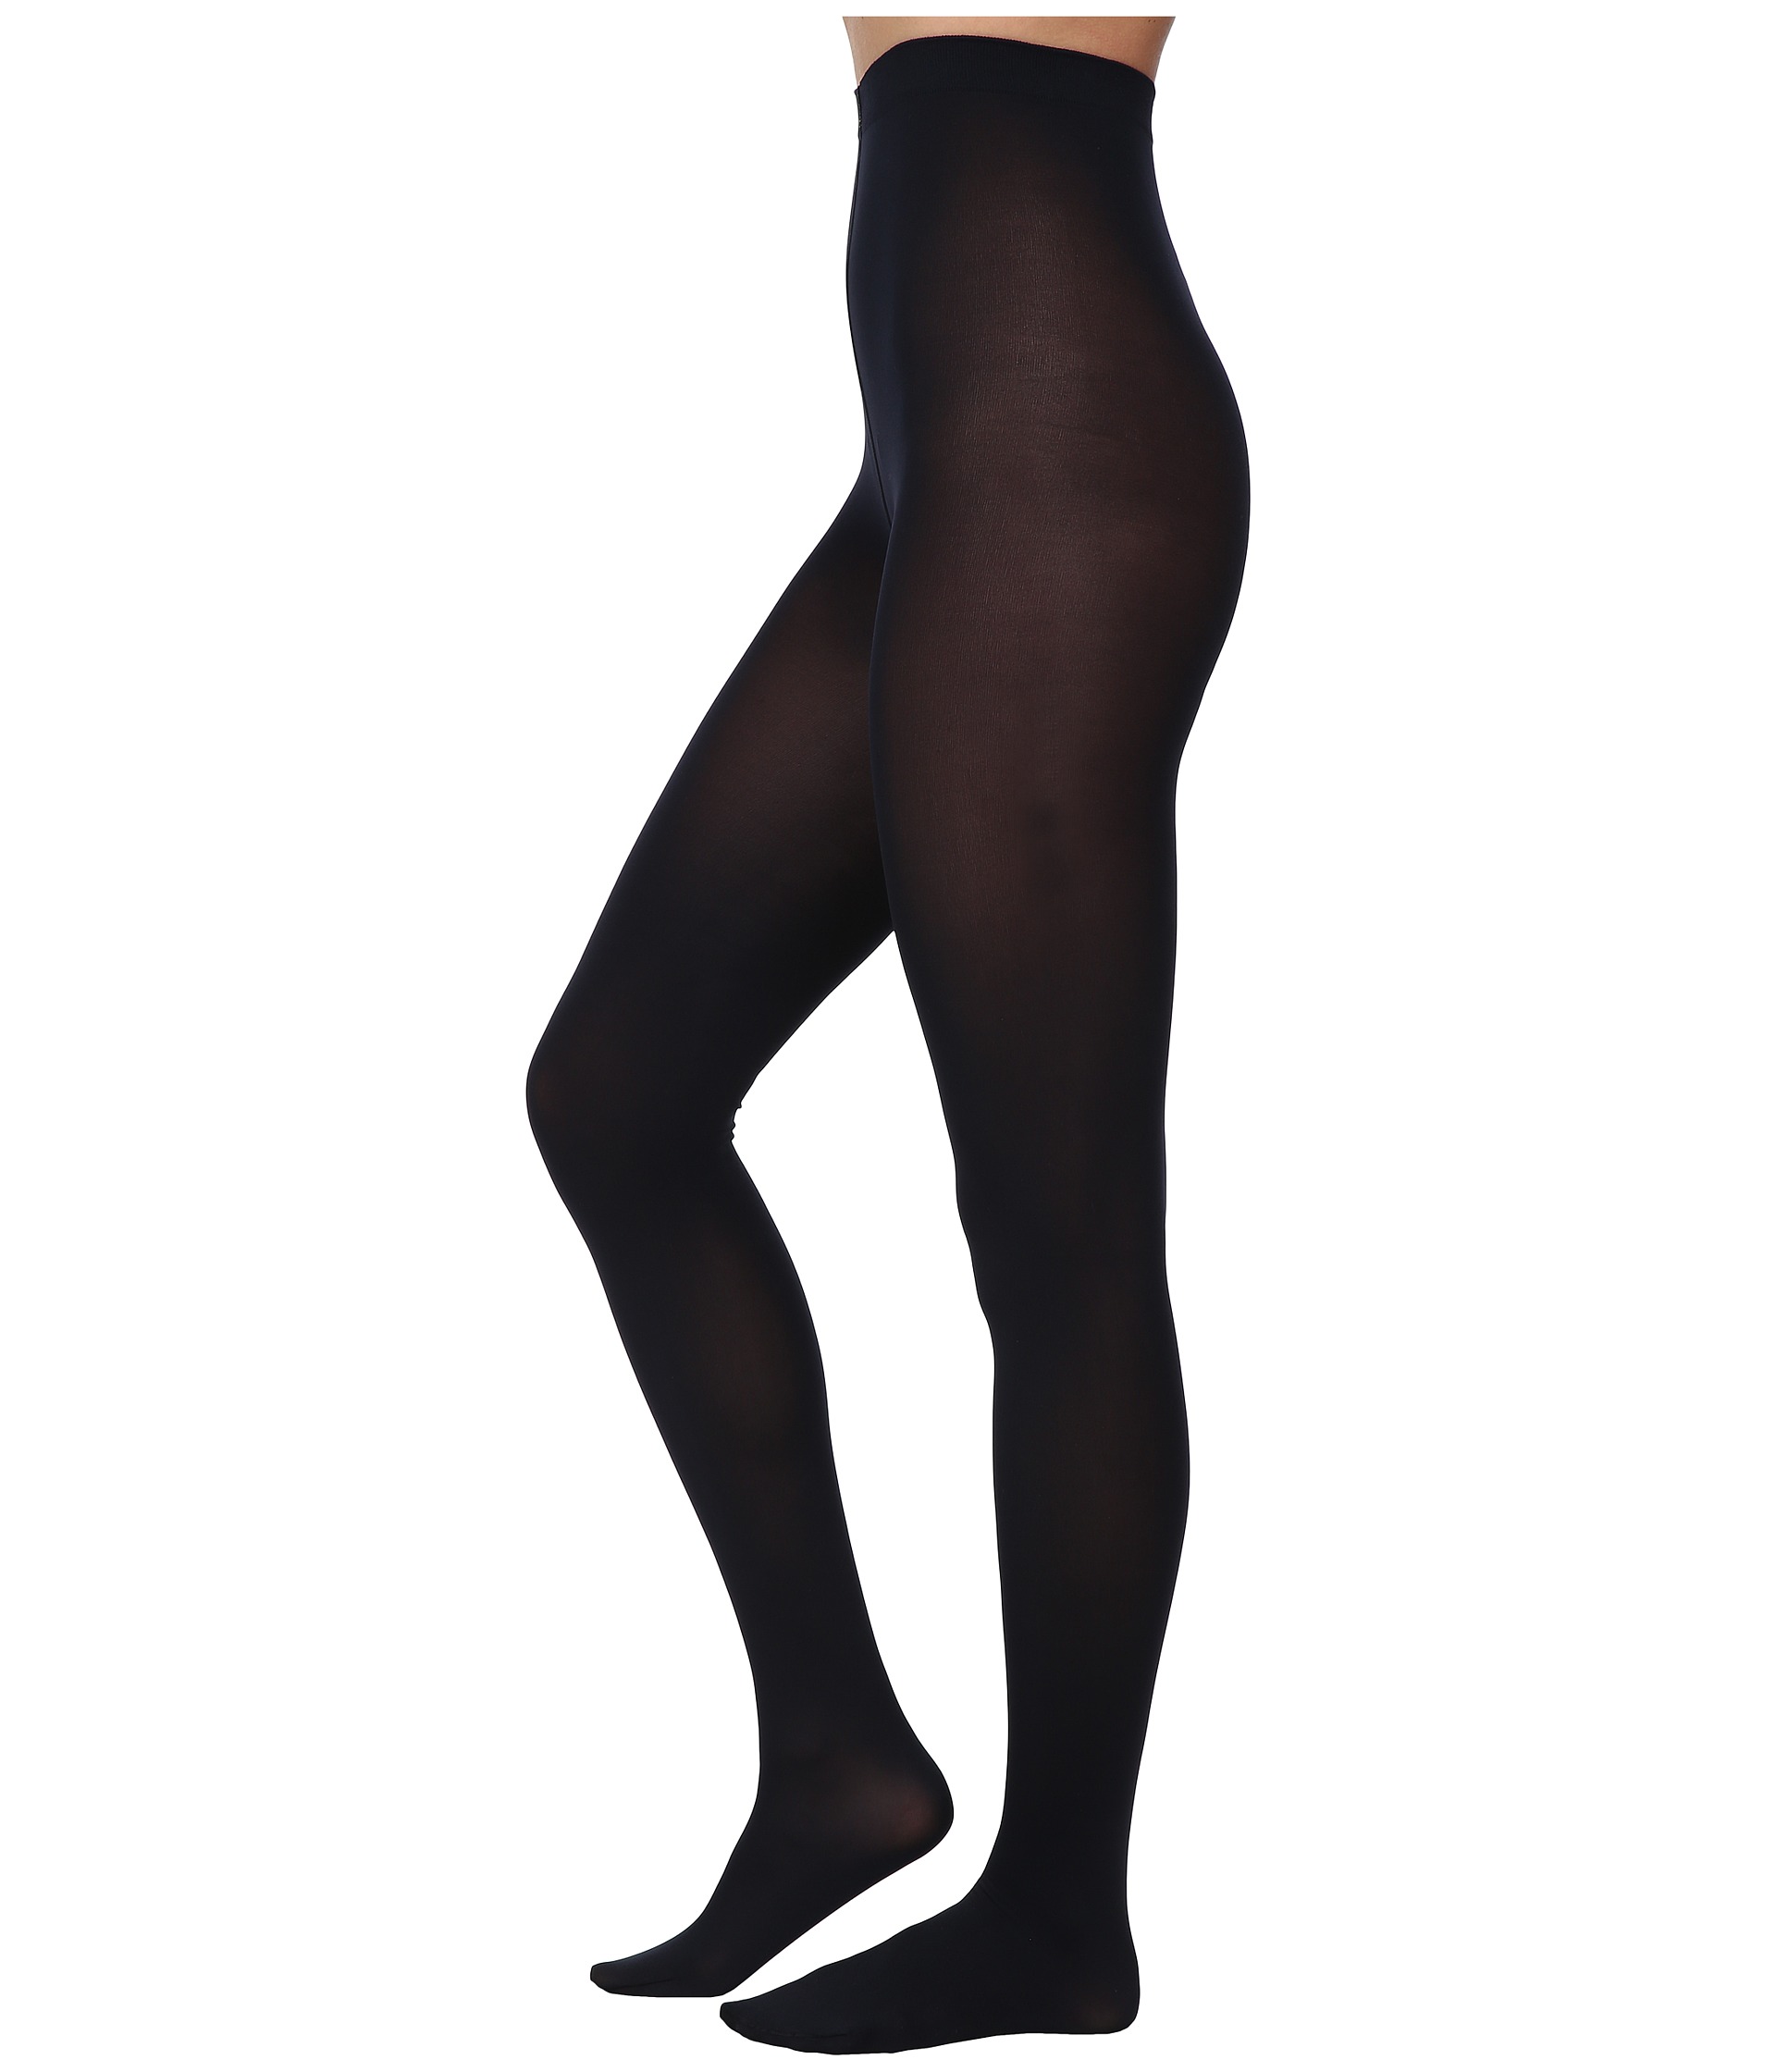 Wolford Velvet De Luxe 66 Tights at Zappos.com